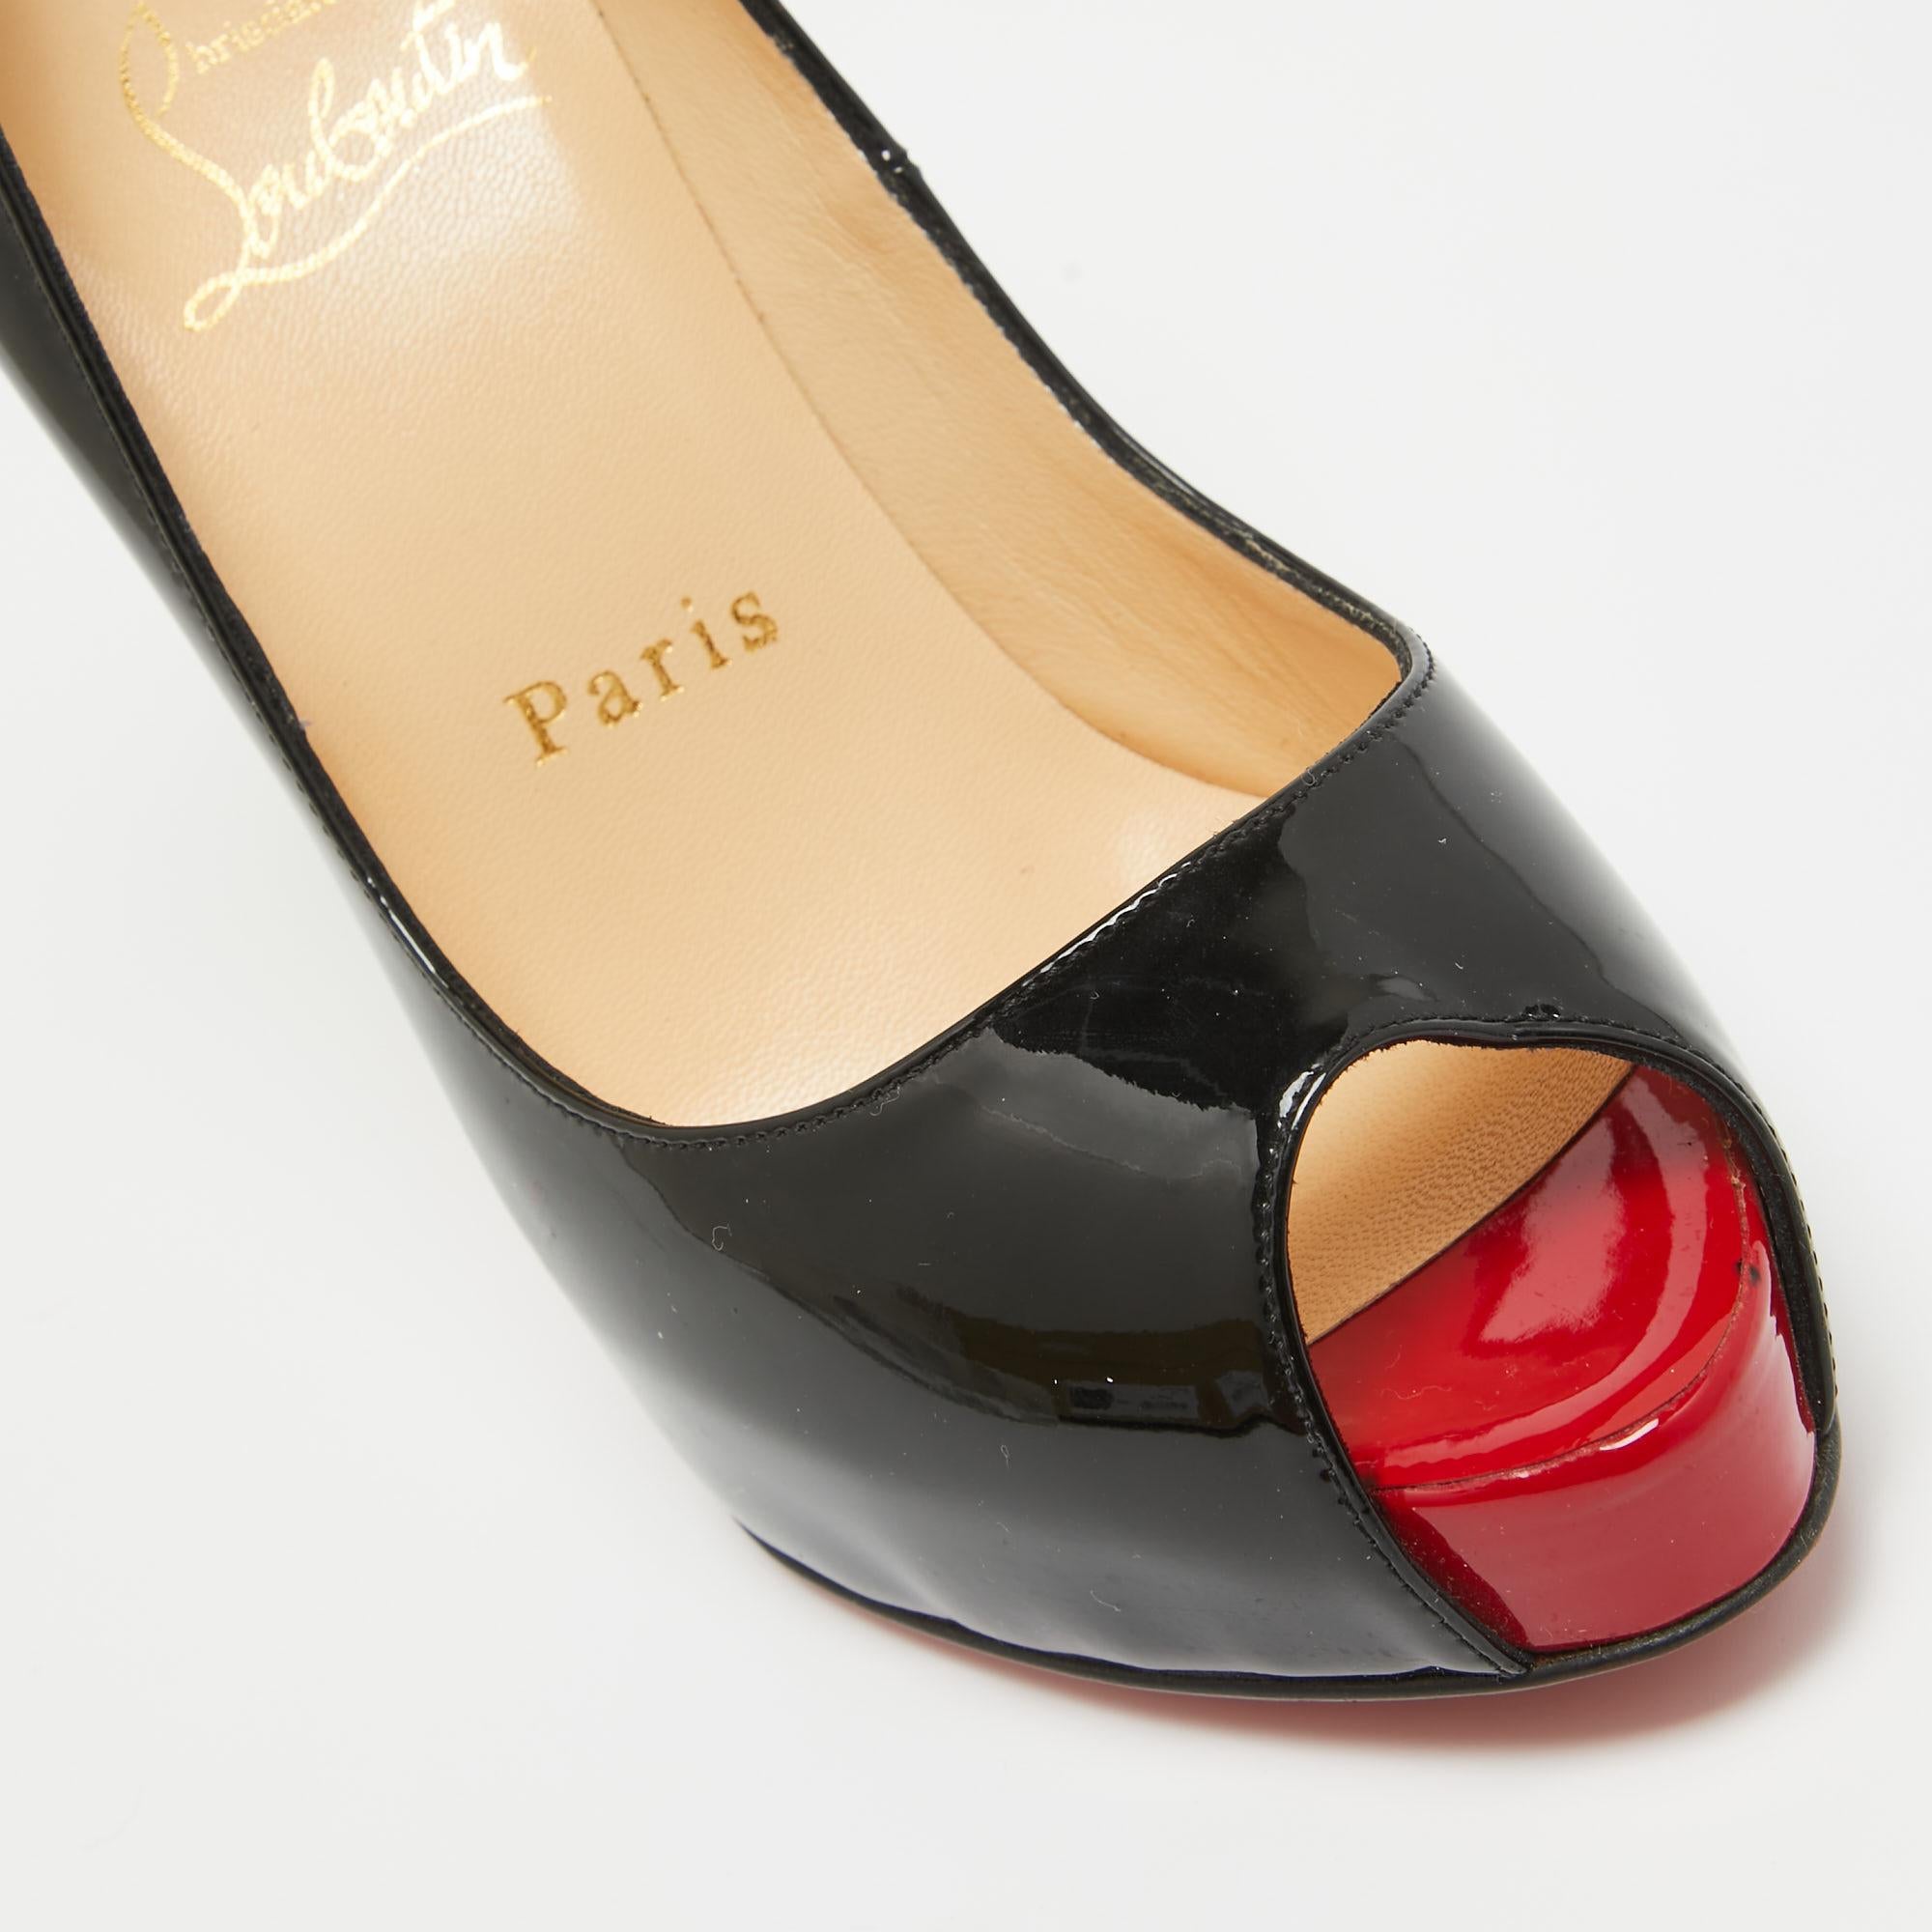 Christian Louboutin Black Patent Leather Very Prive Pumps Size 34 For Sale 4